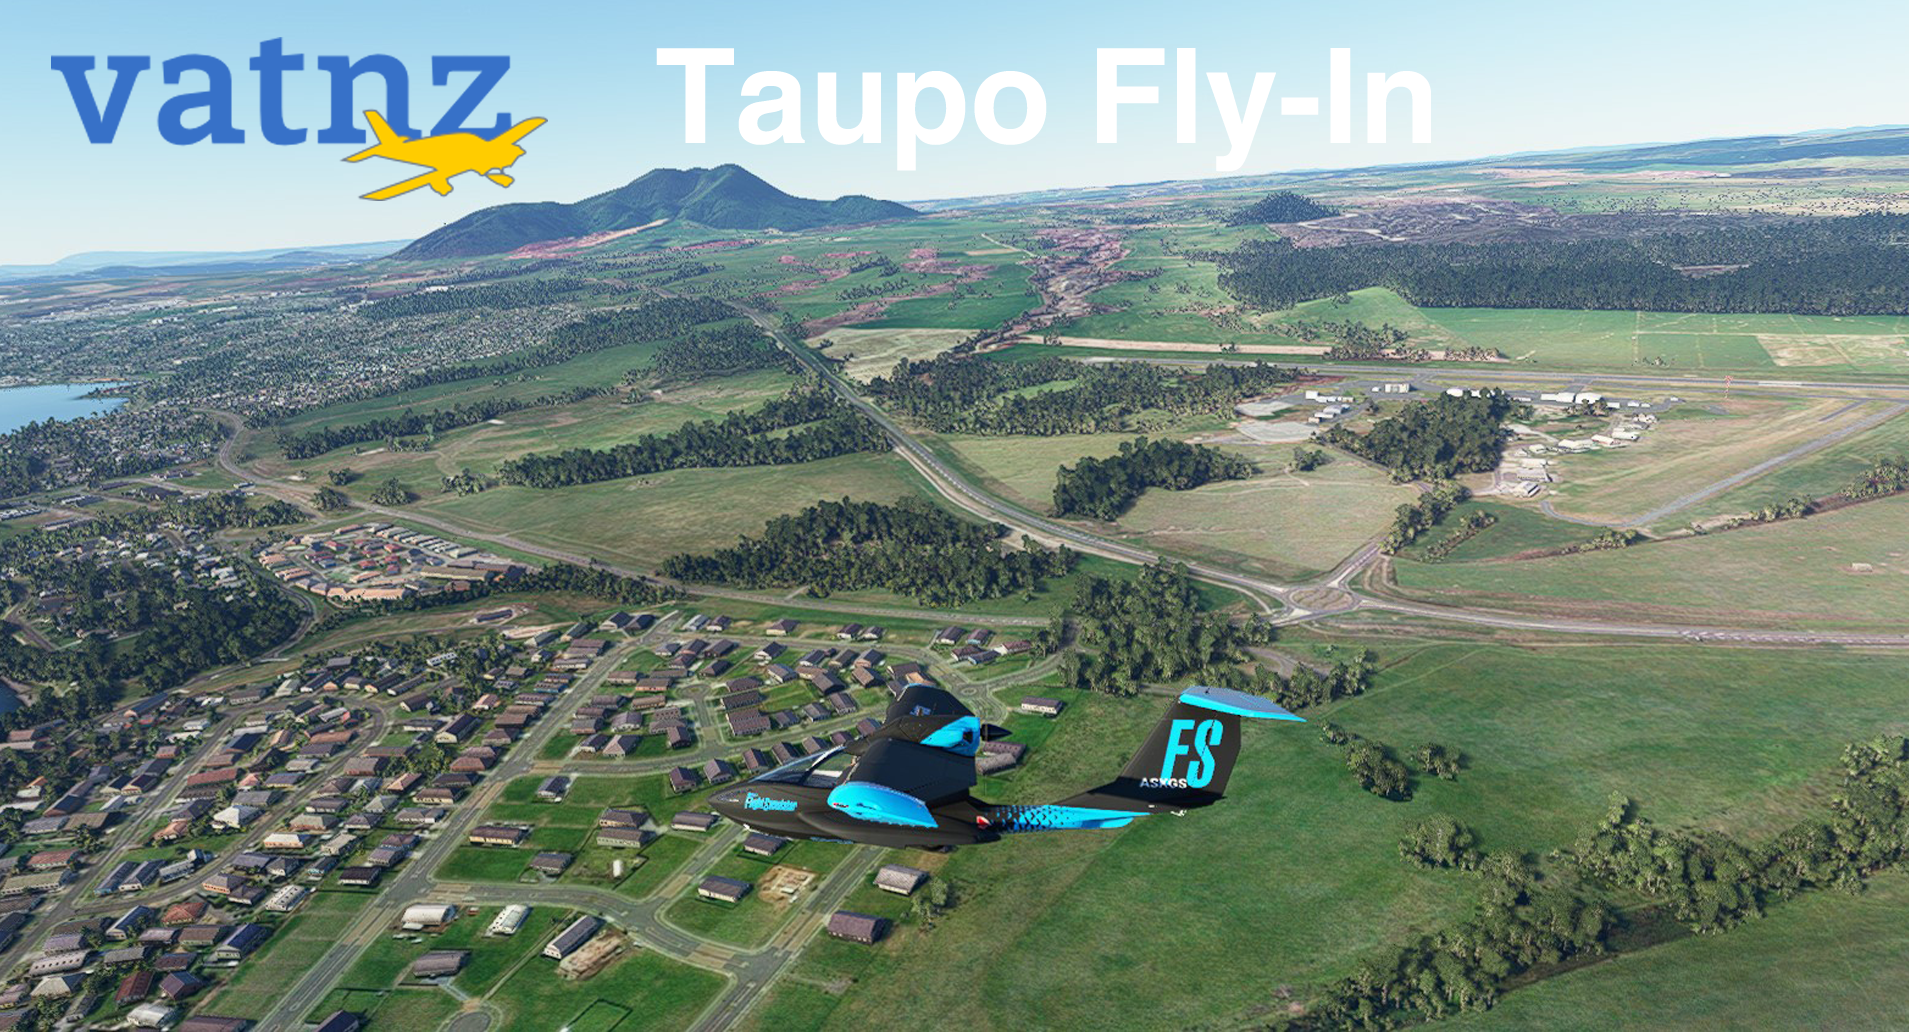 Taupo Fly-in